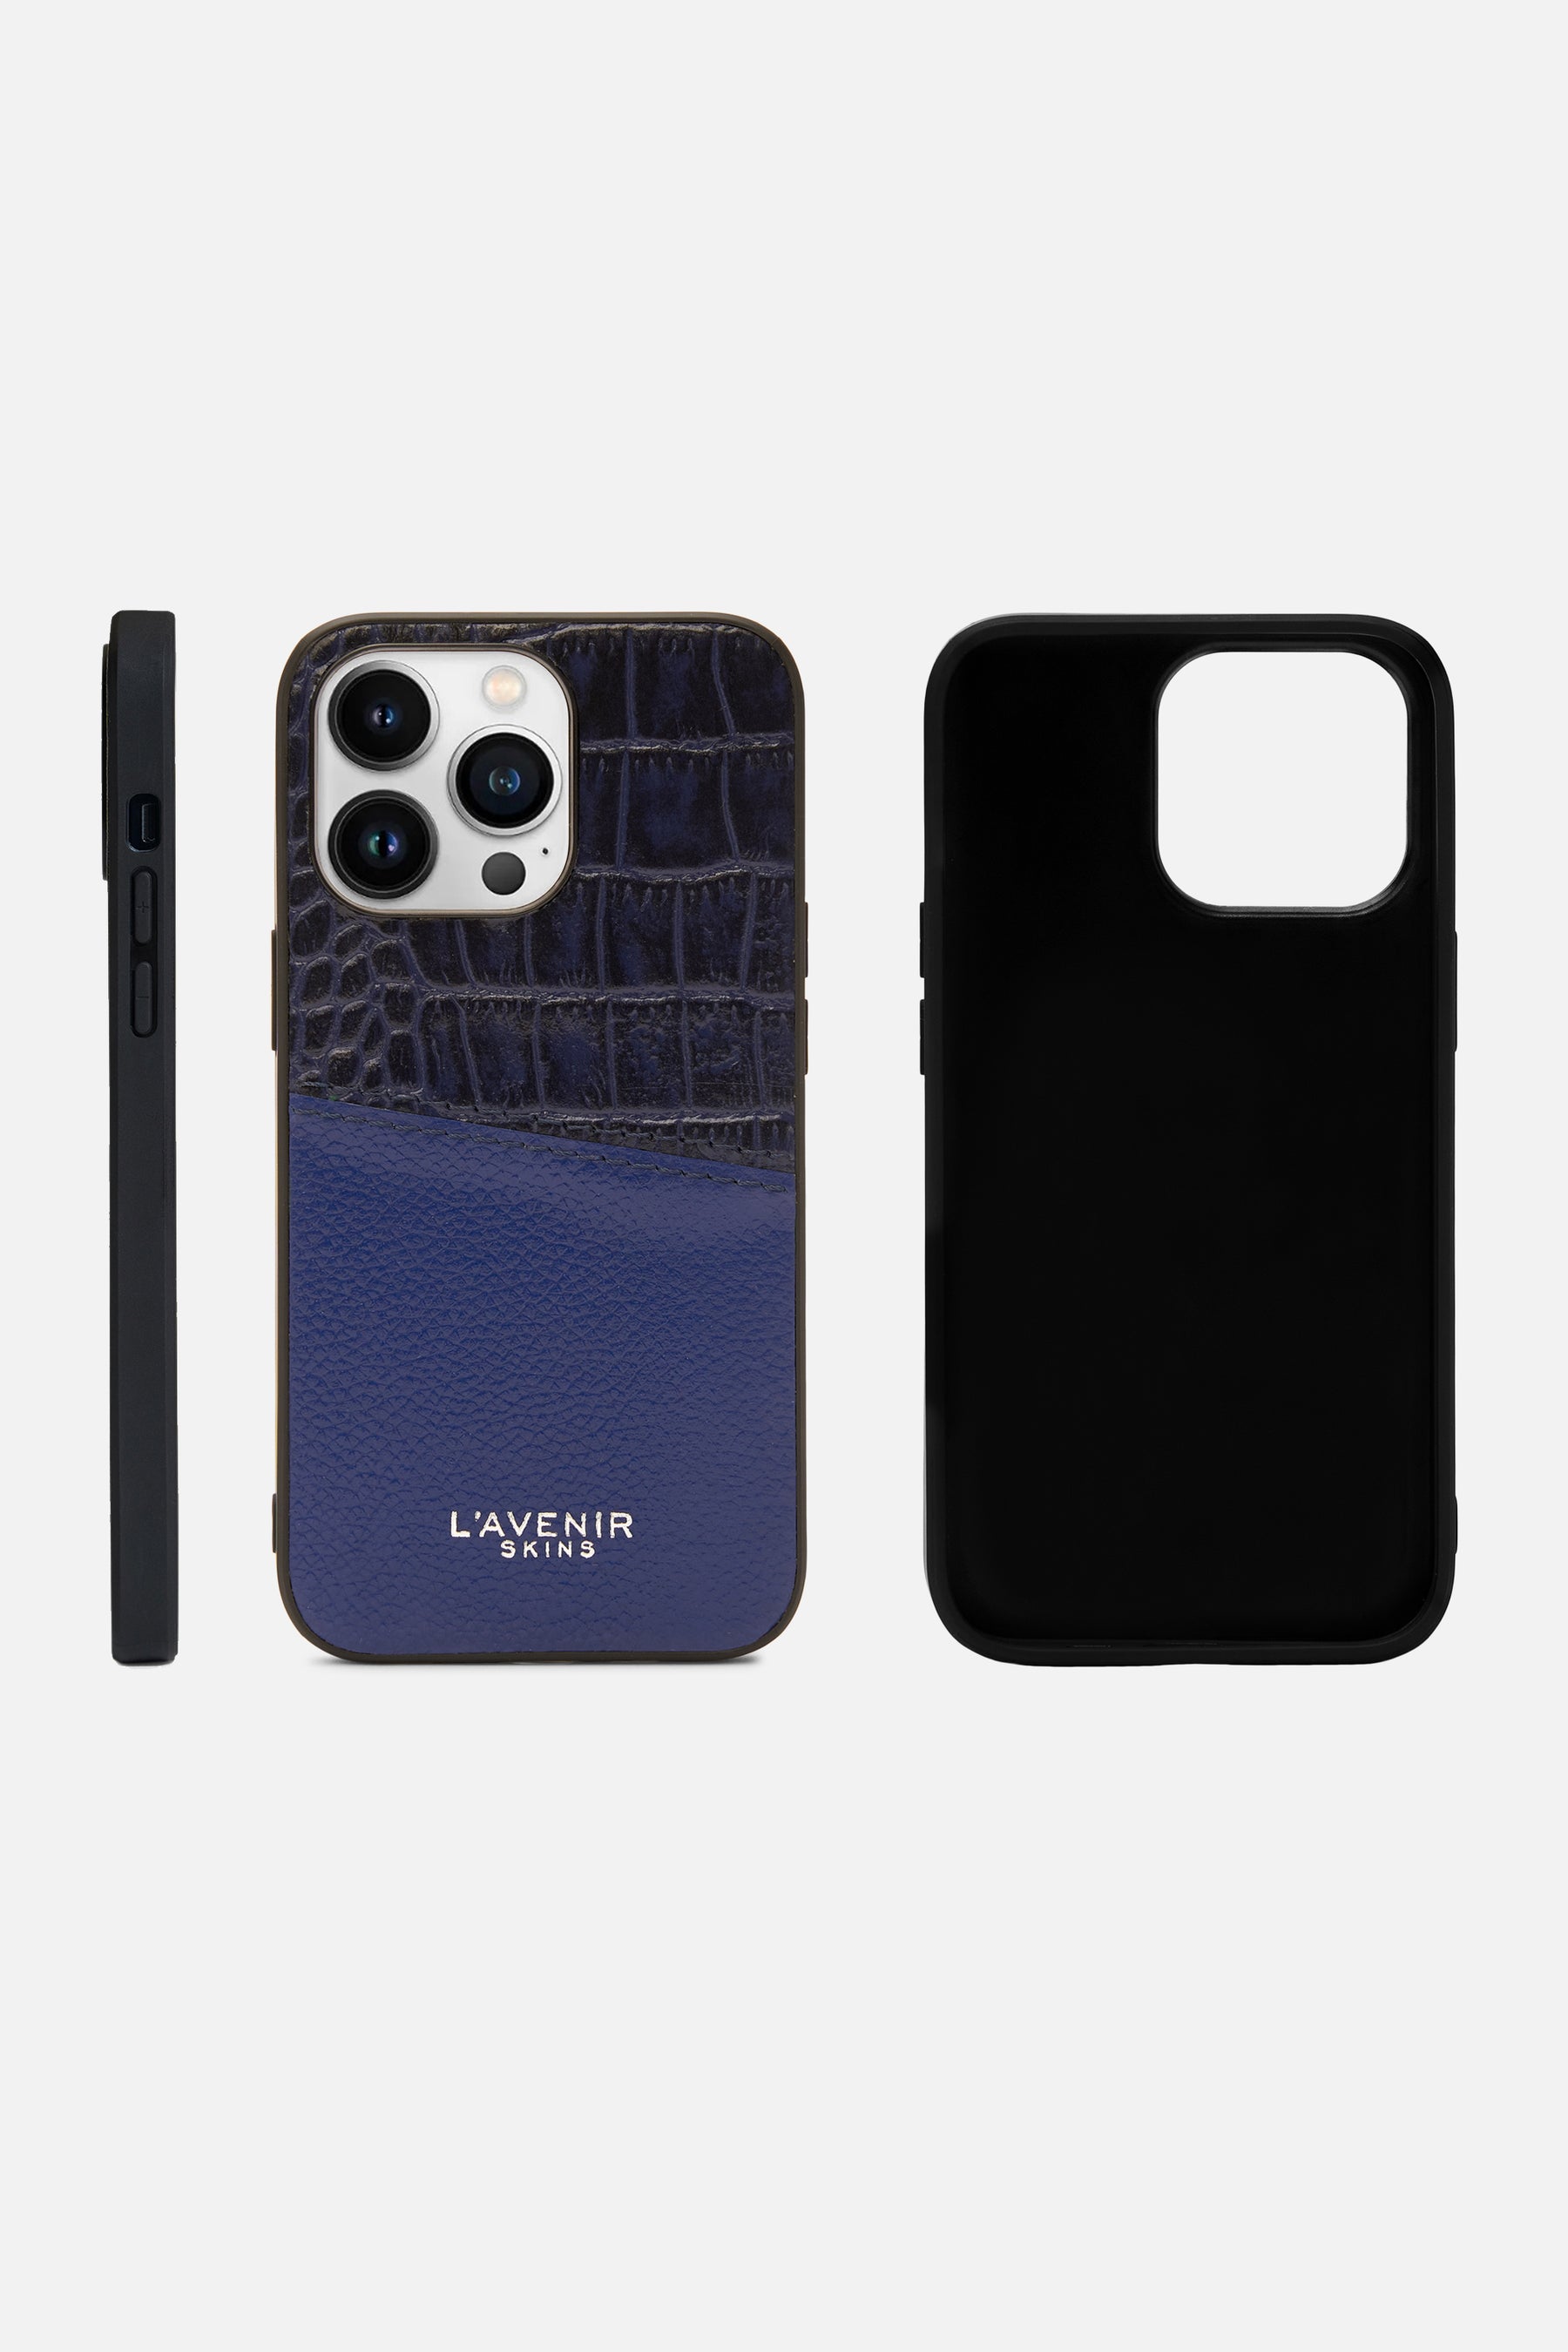 Iphone Case - Dual Tone Stitched - Blue & Navy Croco